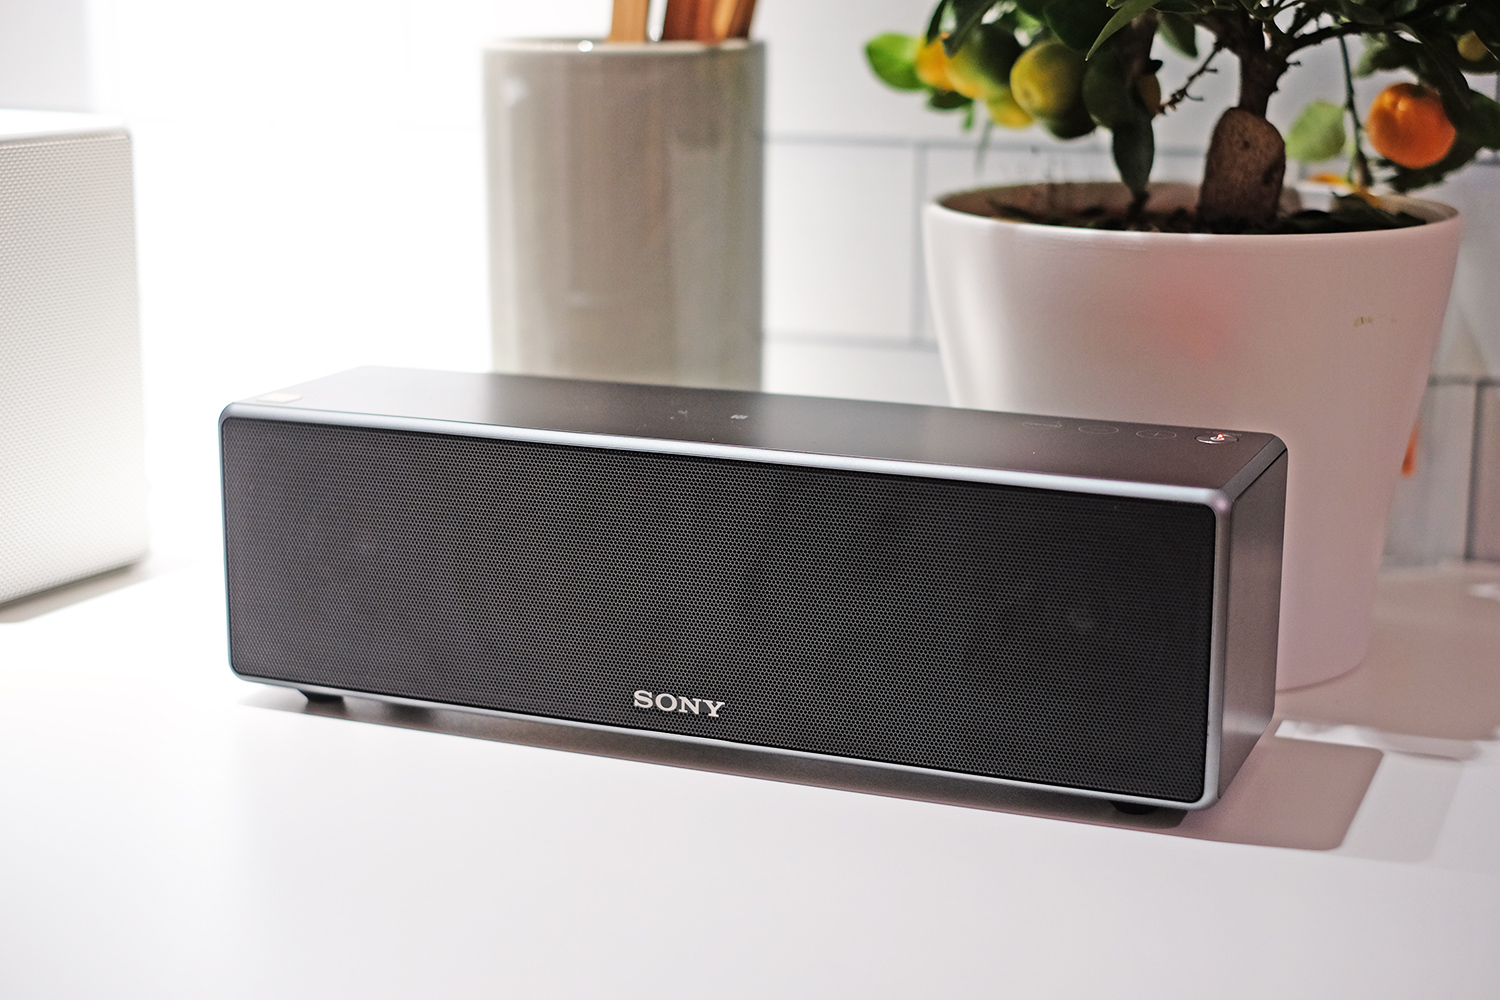 Sony's new multi-room speakers want to knock Sonos off its perch